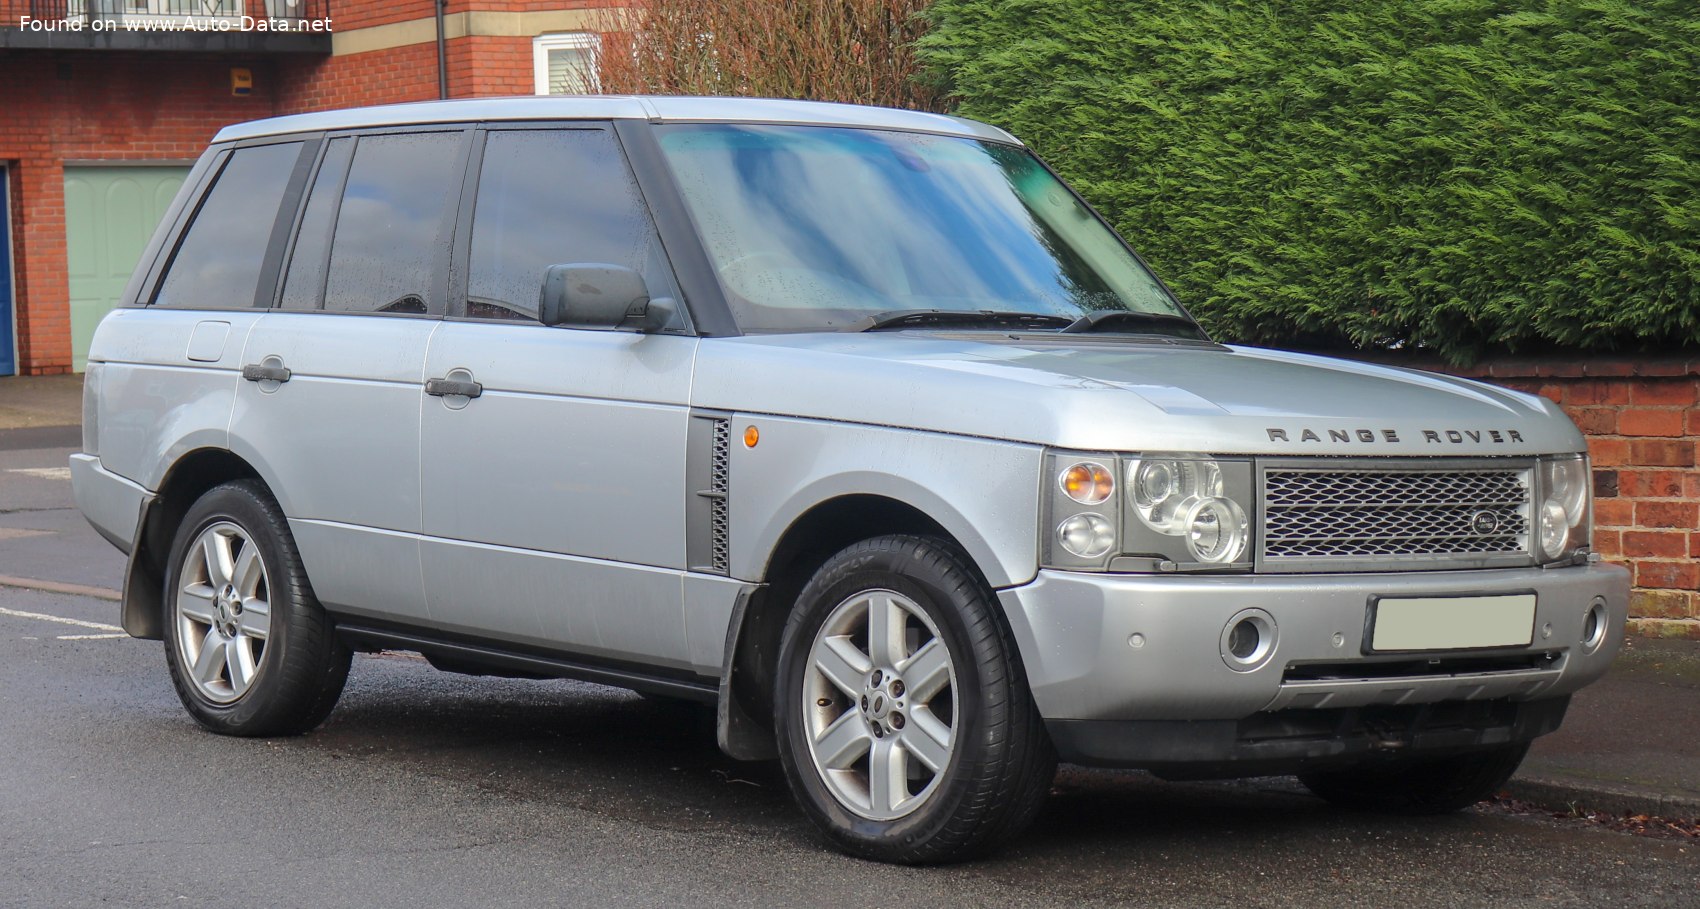 2001 Land Rover Range Rover III 4.4 V8 (286 Hp) | Technical specs, data,  fuel consumption, Dimensions